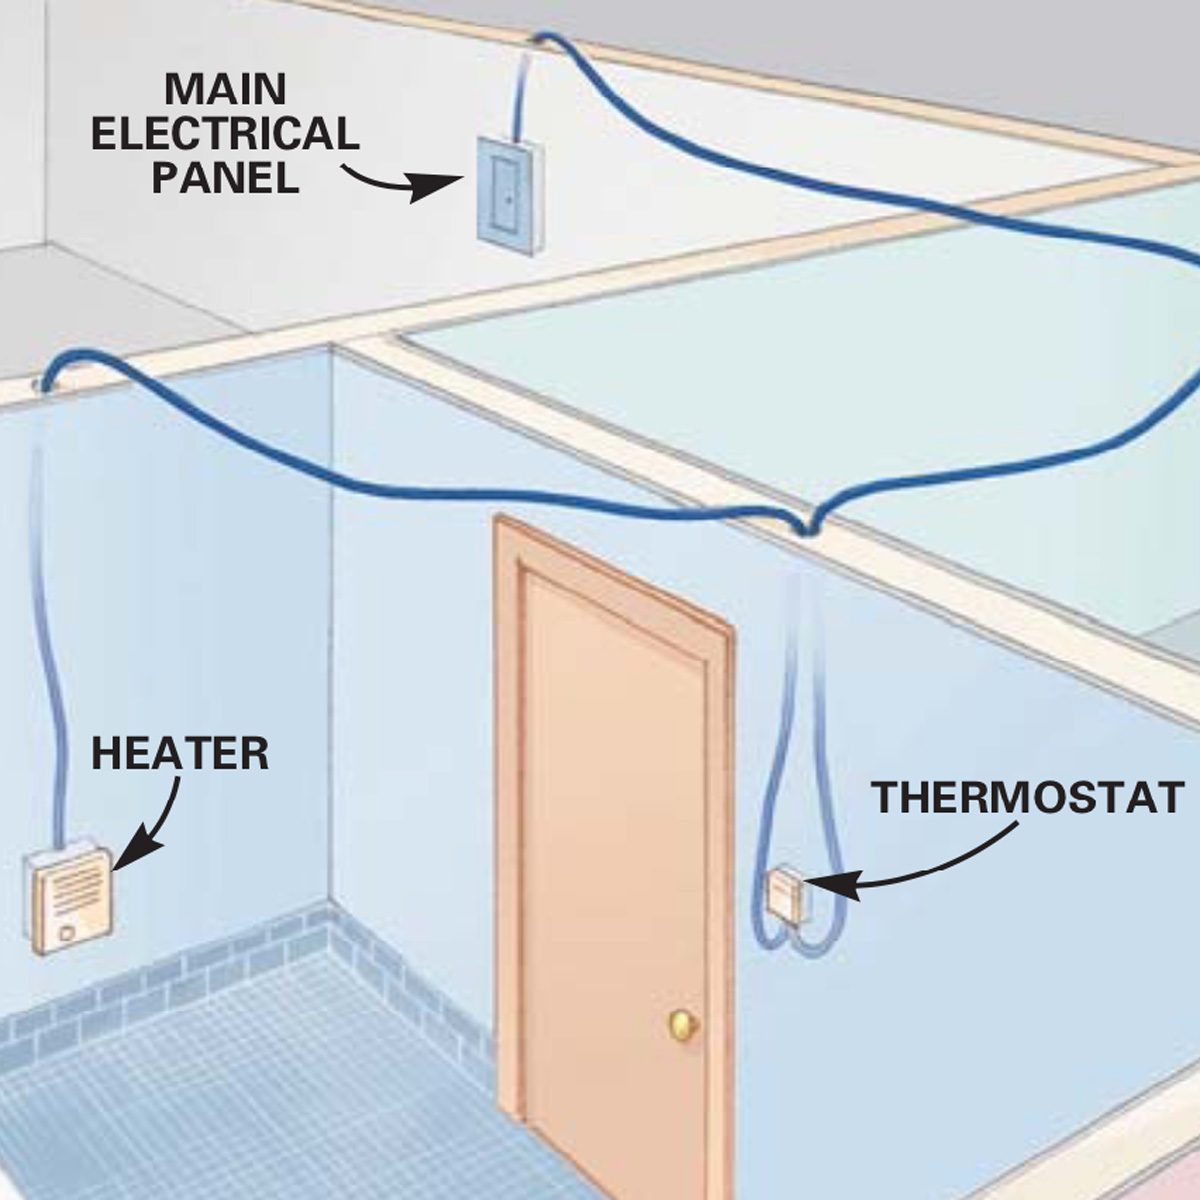 How To Install Electric Heaters | Family Handyman 240v electric heater wiring diagram 